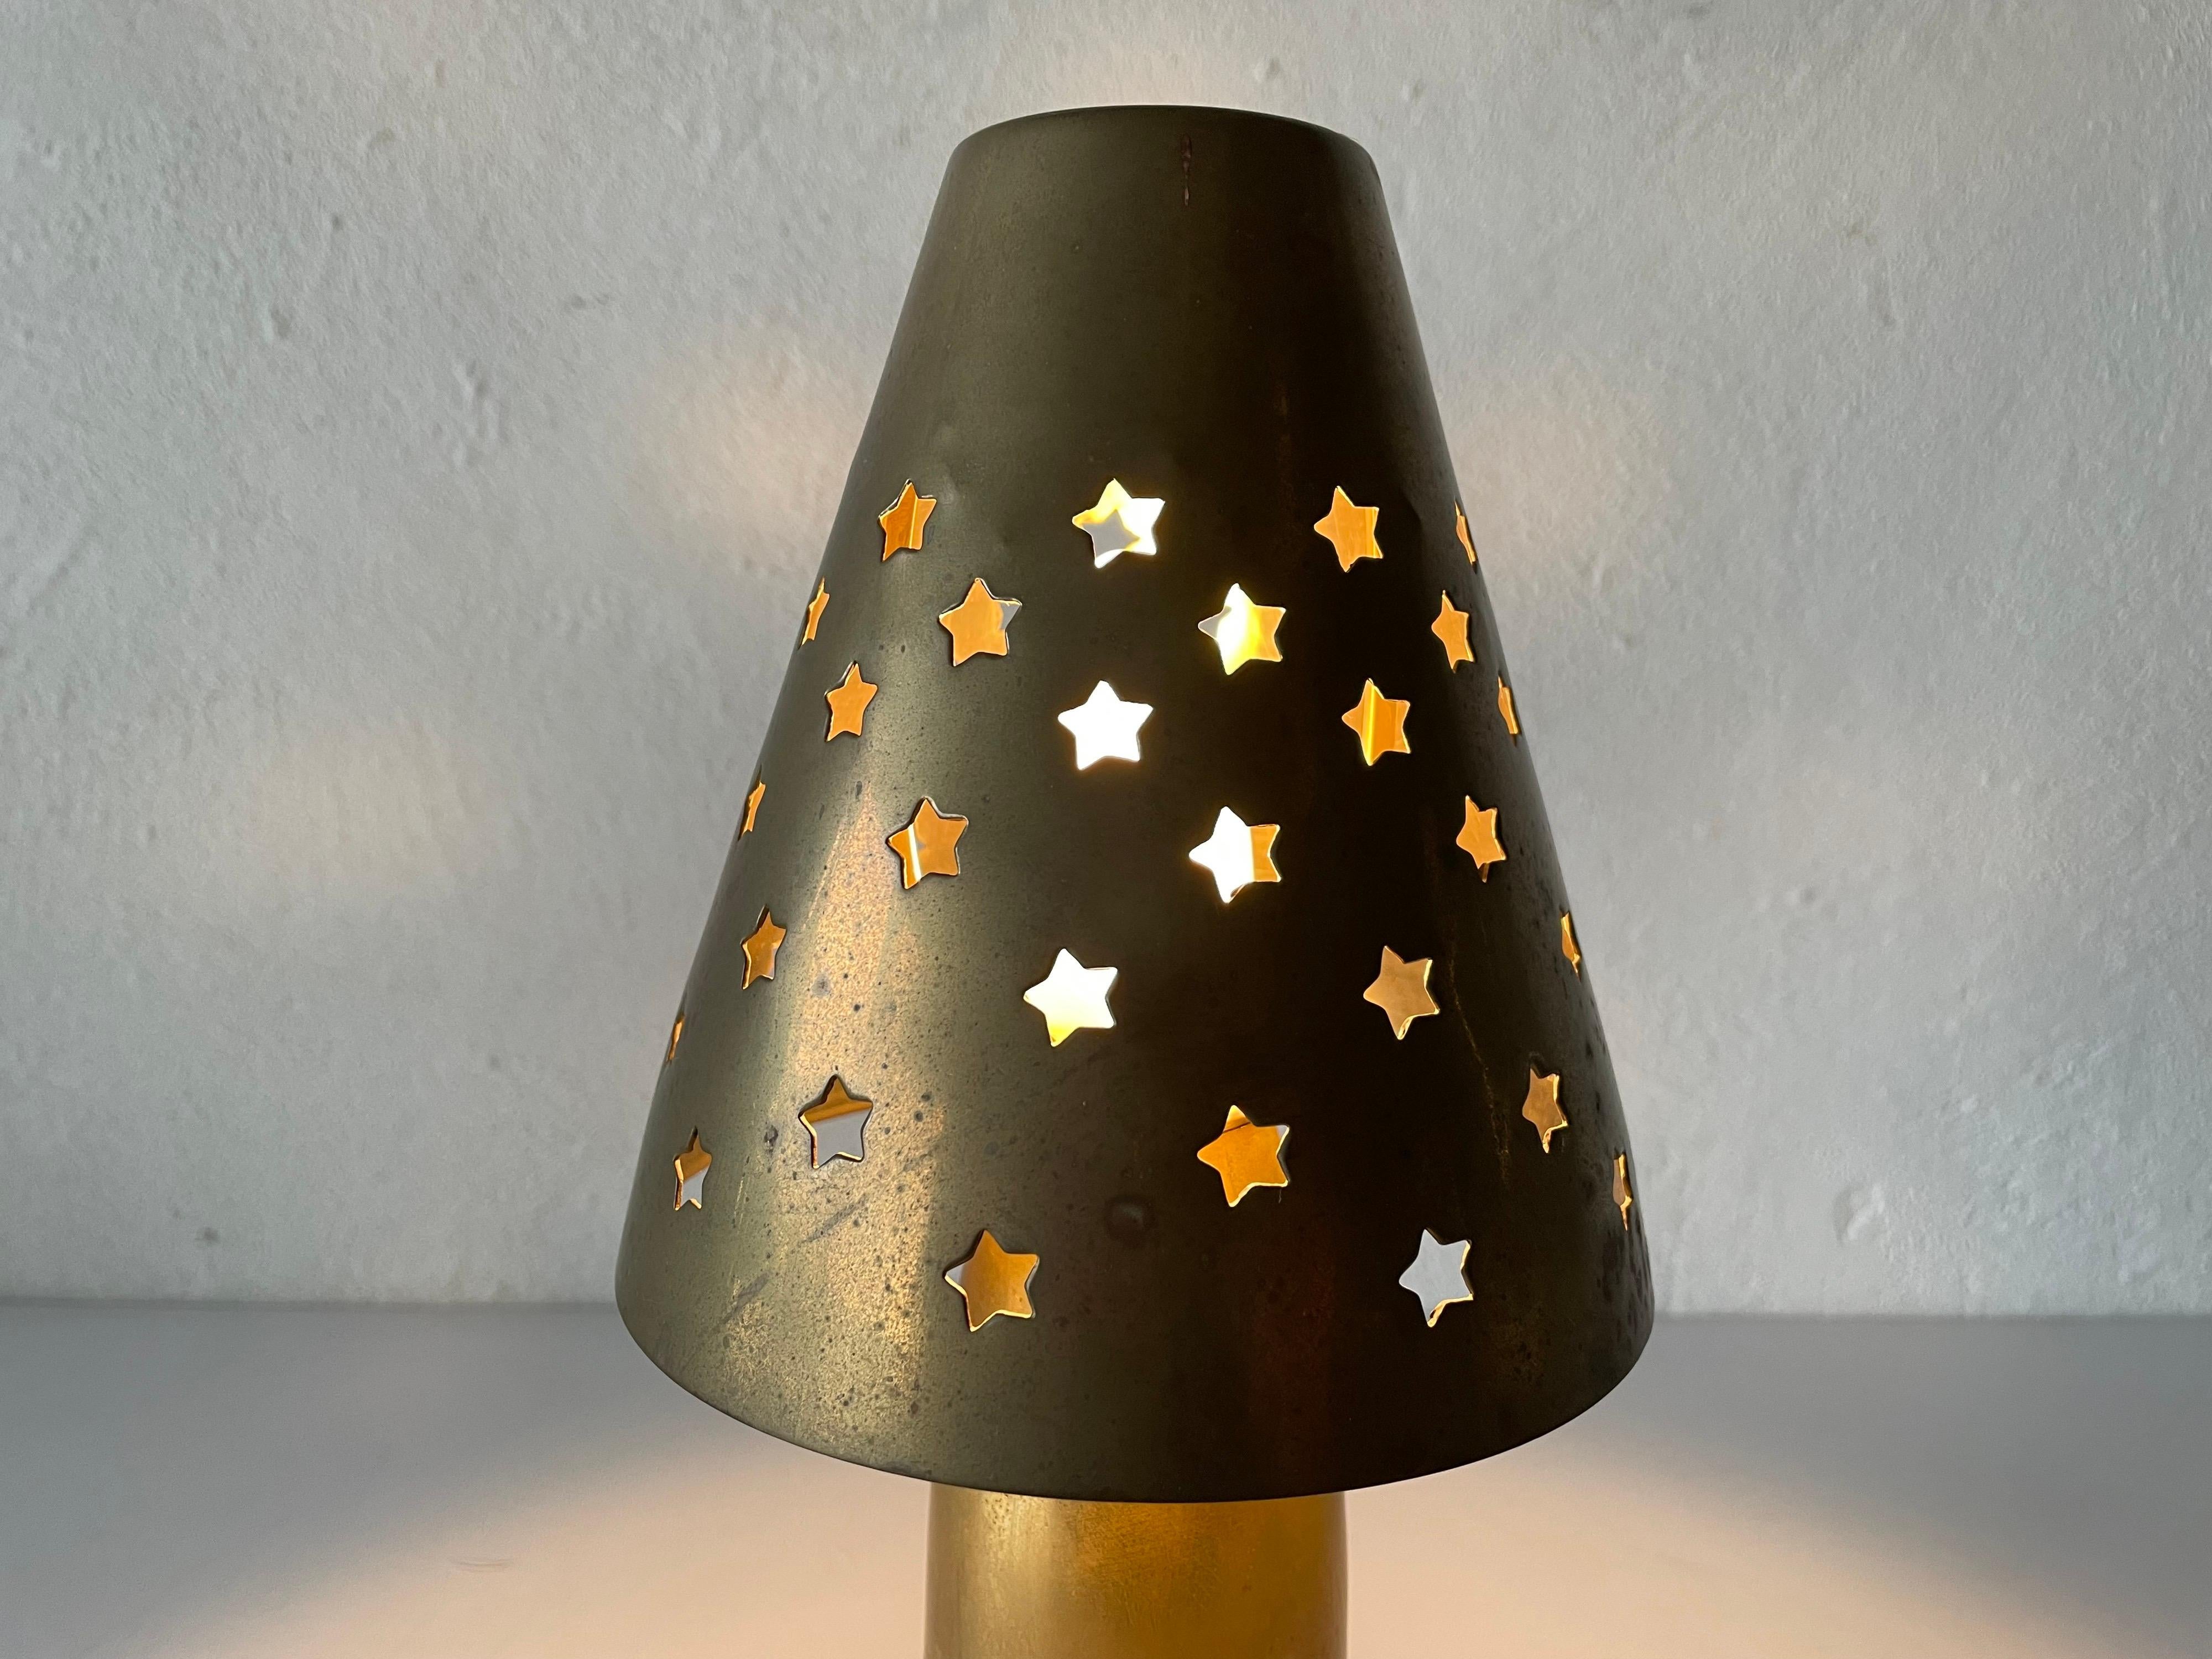 Heavy Full Brass Table Lamp by Gunther Lambert Collection, 1960s, Germany For Sale 5